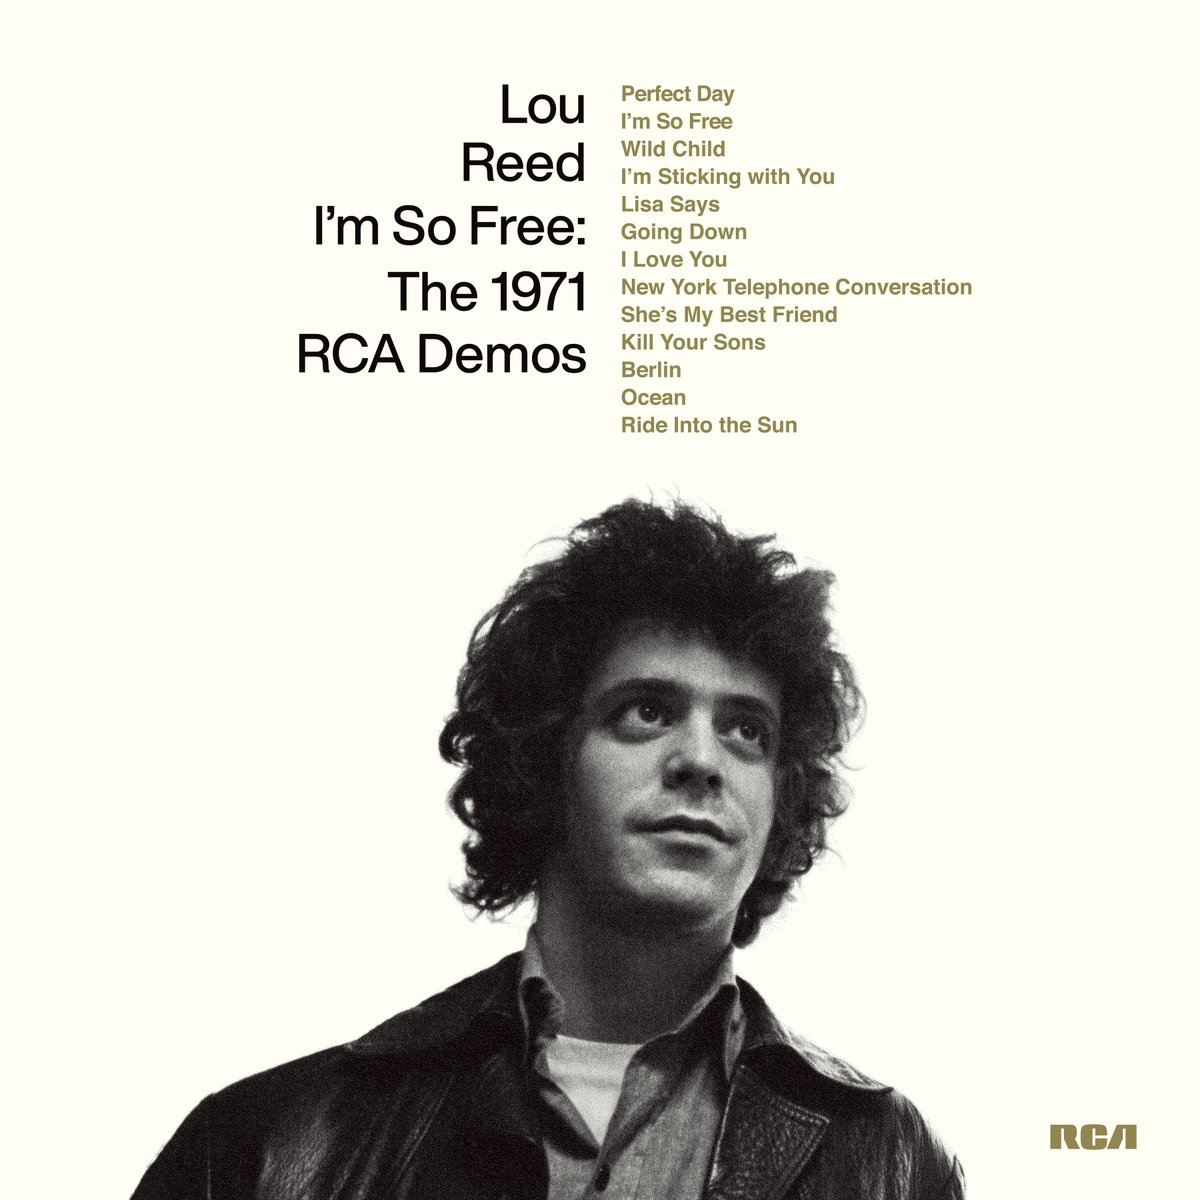 I'm So Free: The 1971 RCA Demos is available to stream! Released this past April on vinyl only for Record Store Day, you can now cue it up on your streaming platform of choice. Spotify: open.spotify.com/album/0RMo35hj… Apple: music.apple.com/us/album/im-so… YouTube: music.youtube.com/playlist?list=…